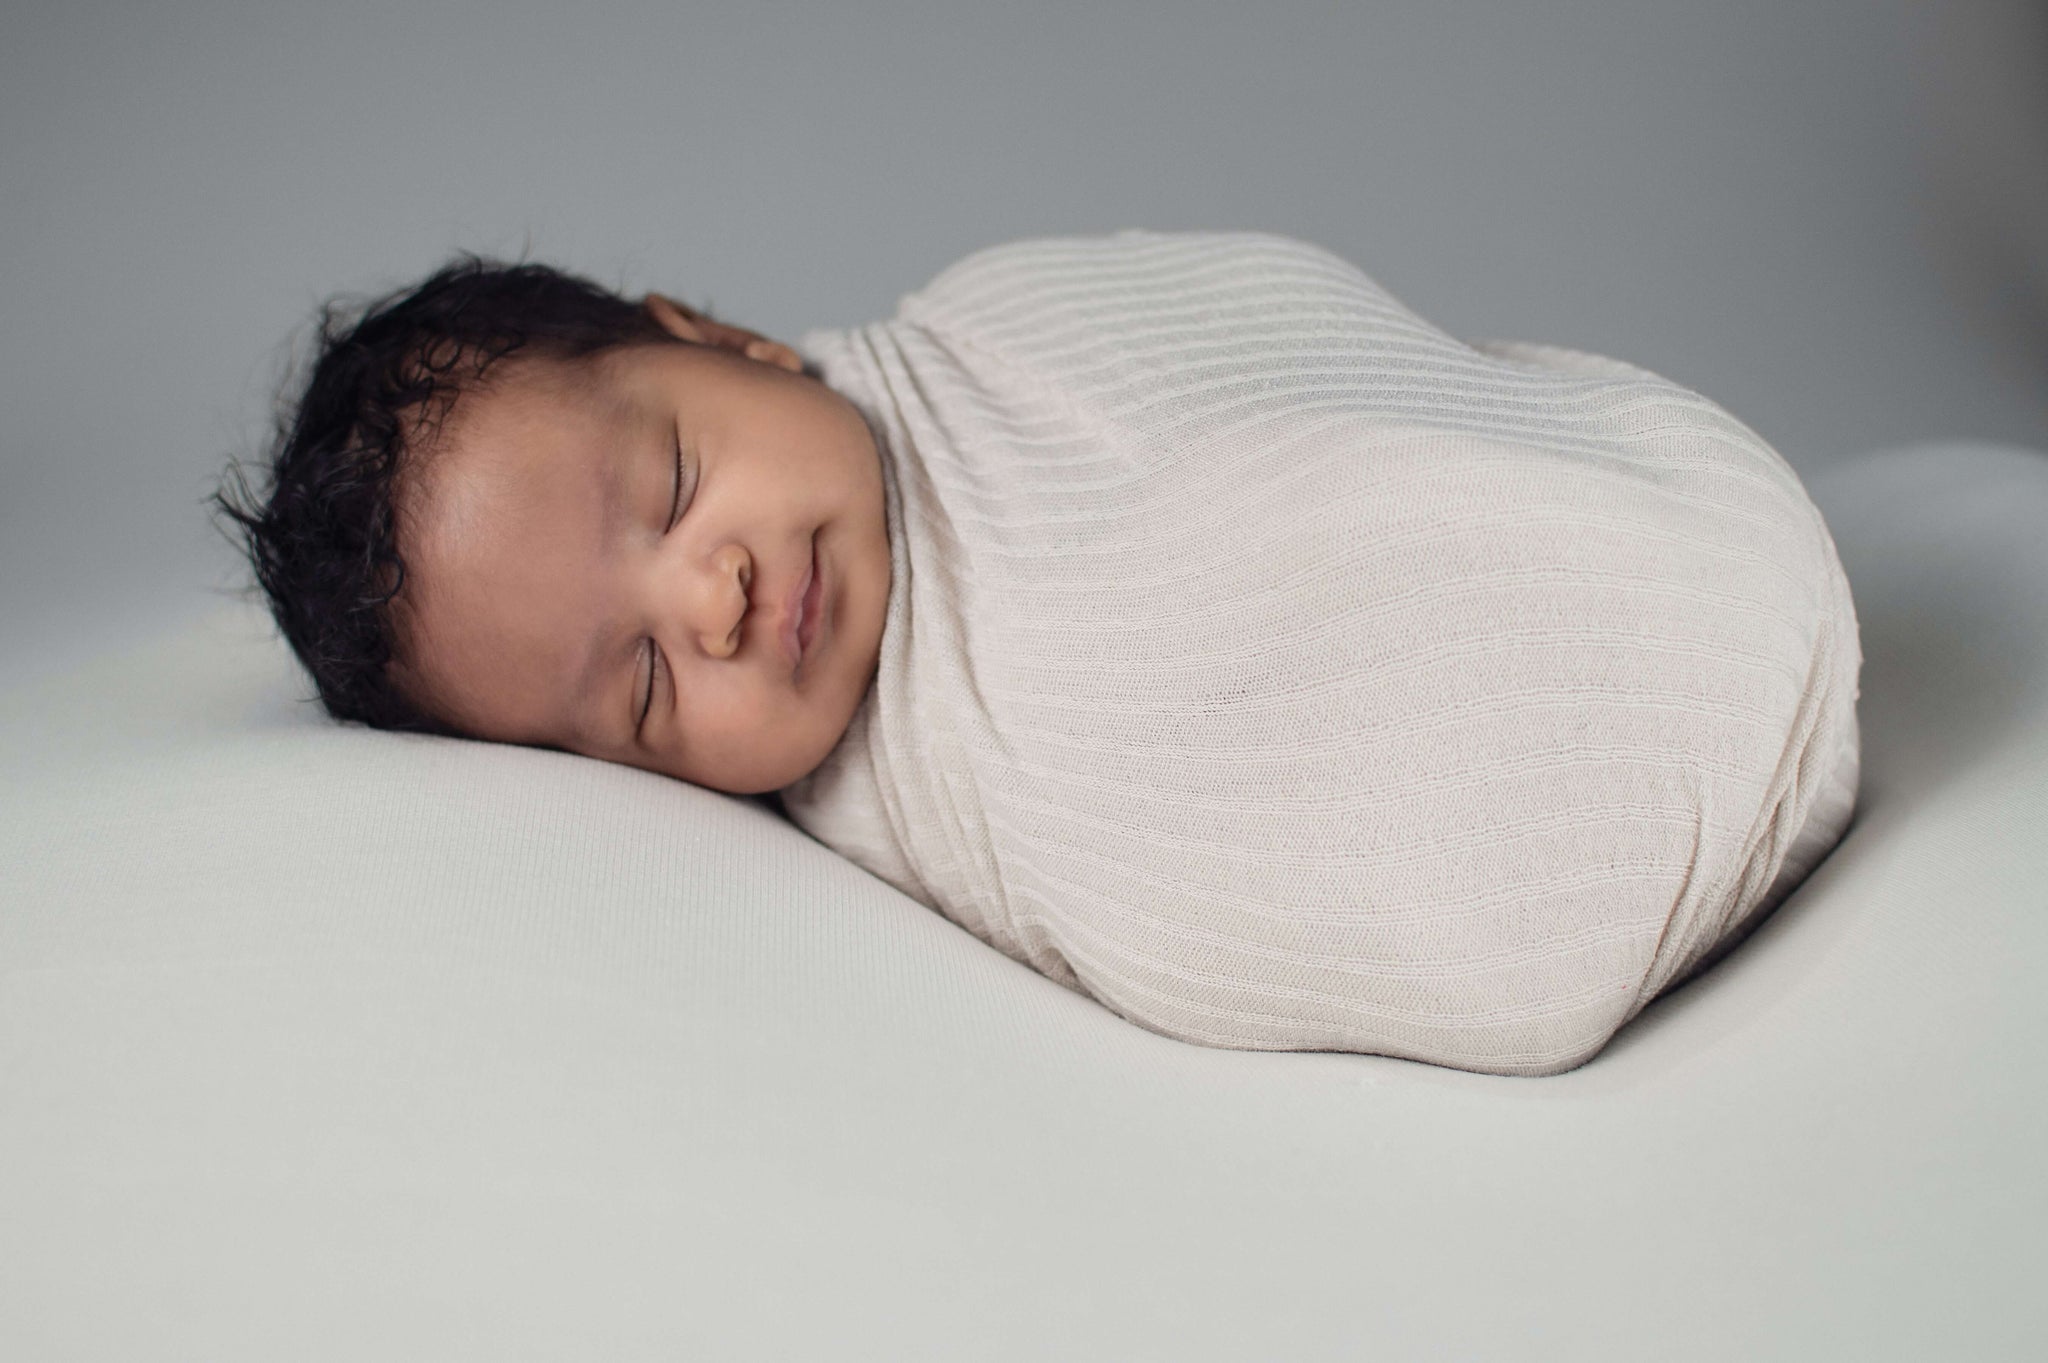 Baby Safe Sleep Frequently Asked Questions